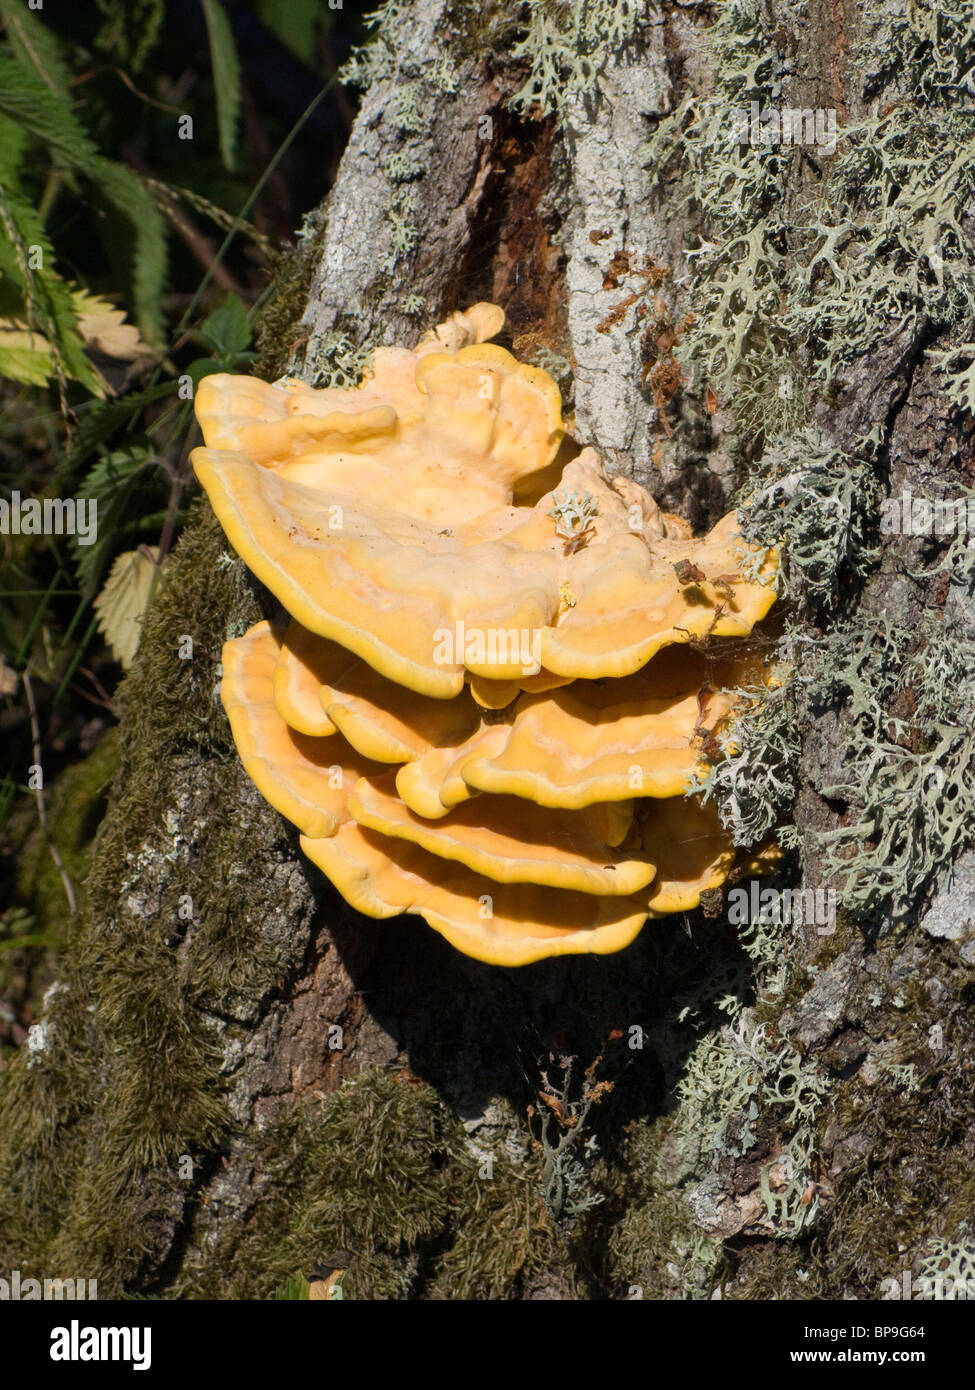 Fungus growing on an old oak, giving it a rot inside. Stock Photo